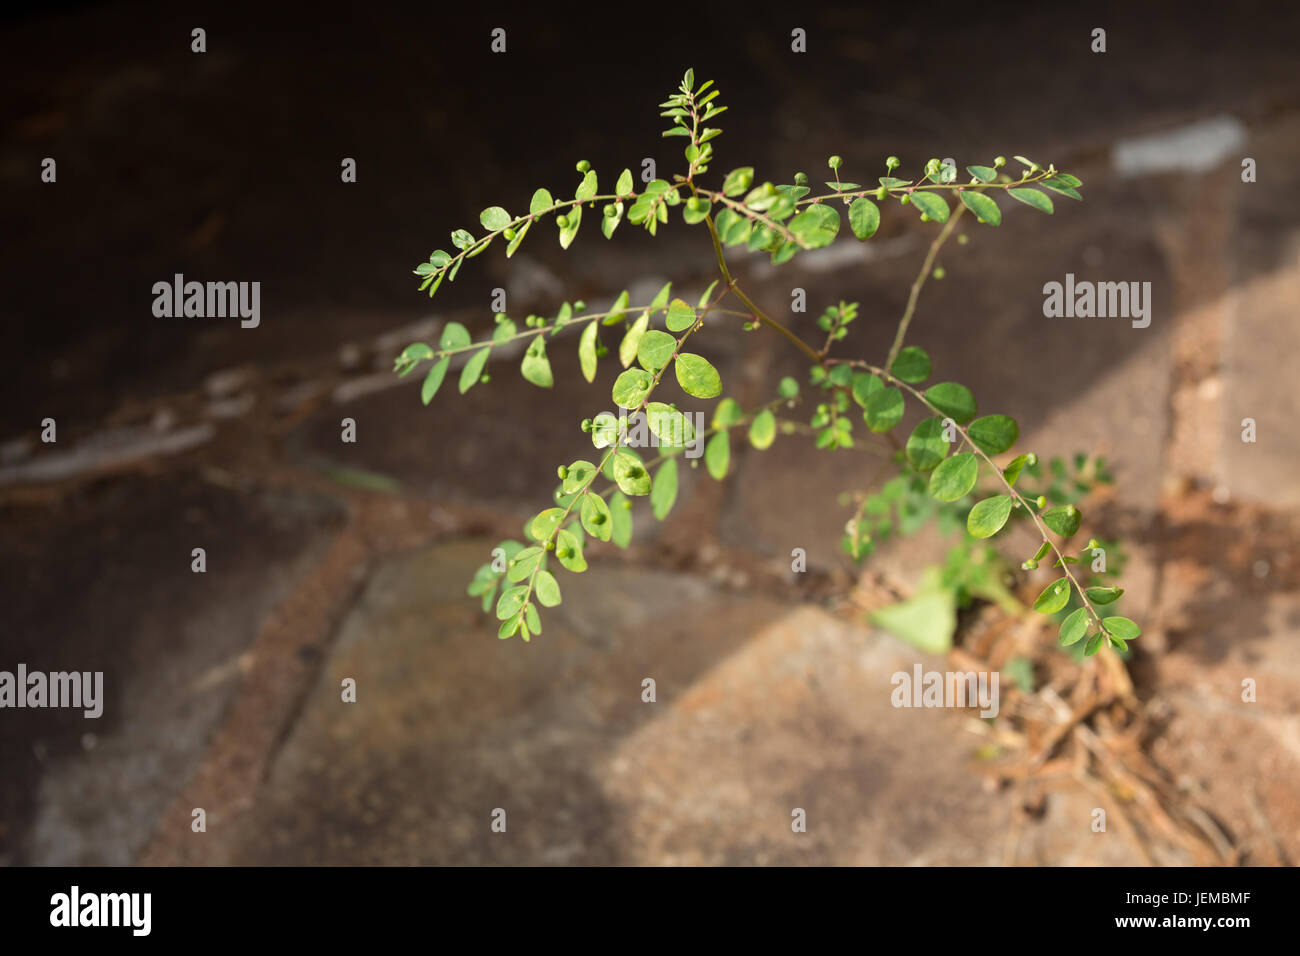 Wild herbaceous plant (Phyllanthus tenellus) growing as a weed through crack in path, Asuncion, Paraguay Stock Photo